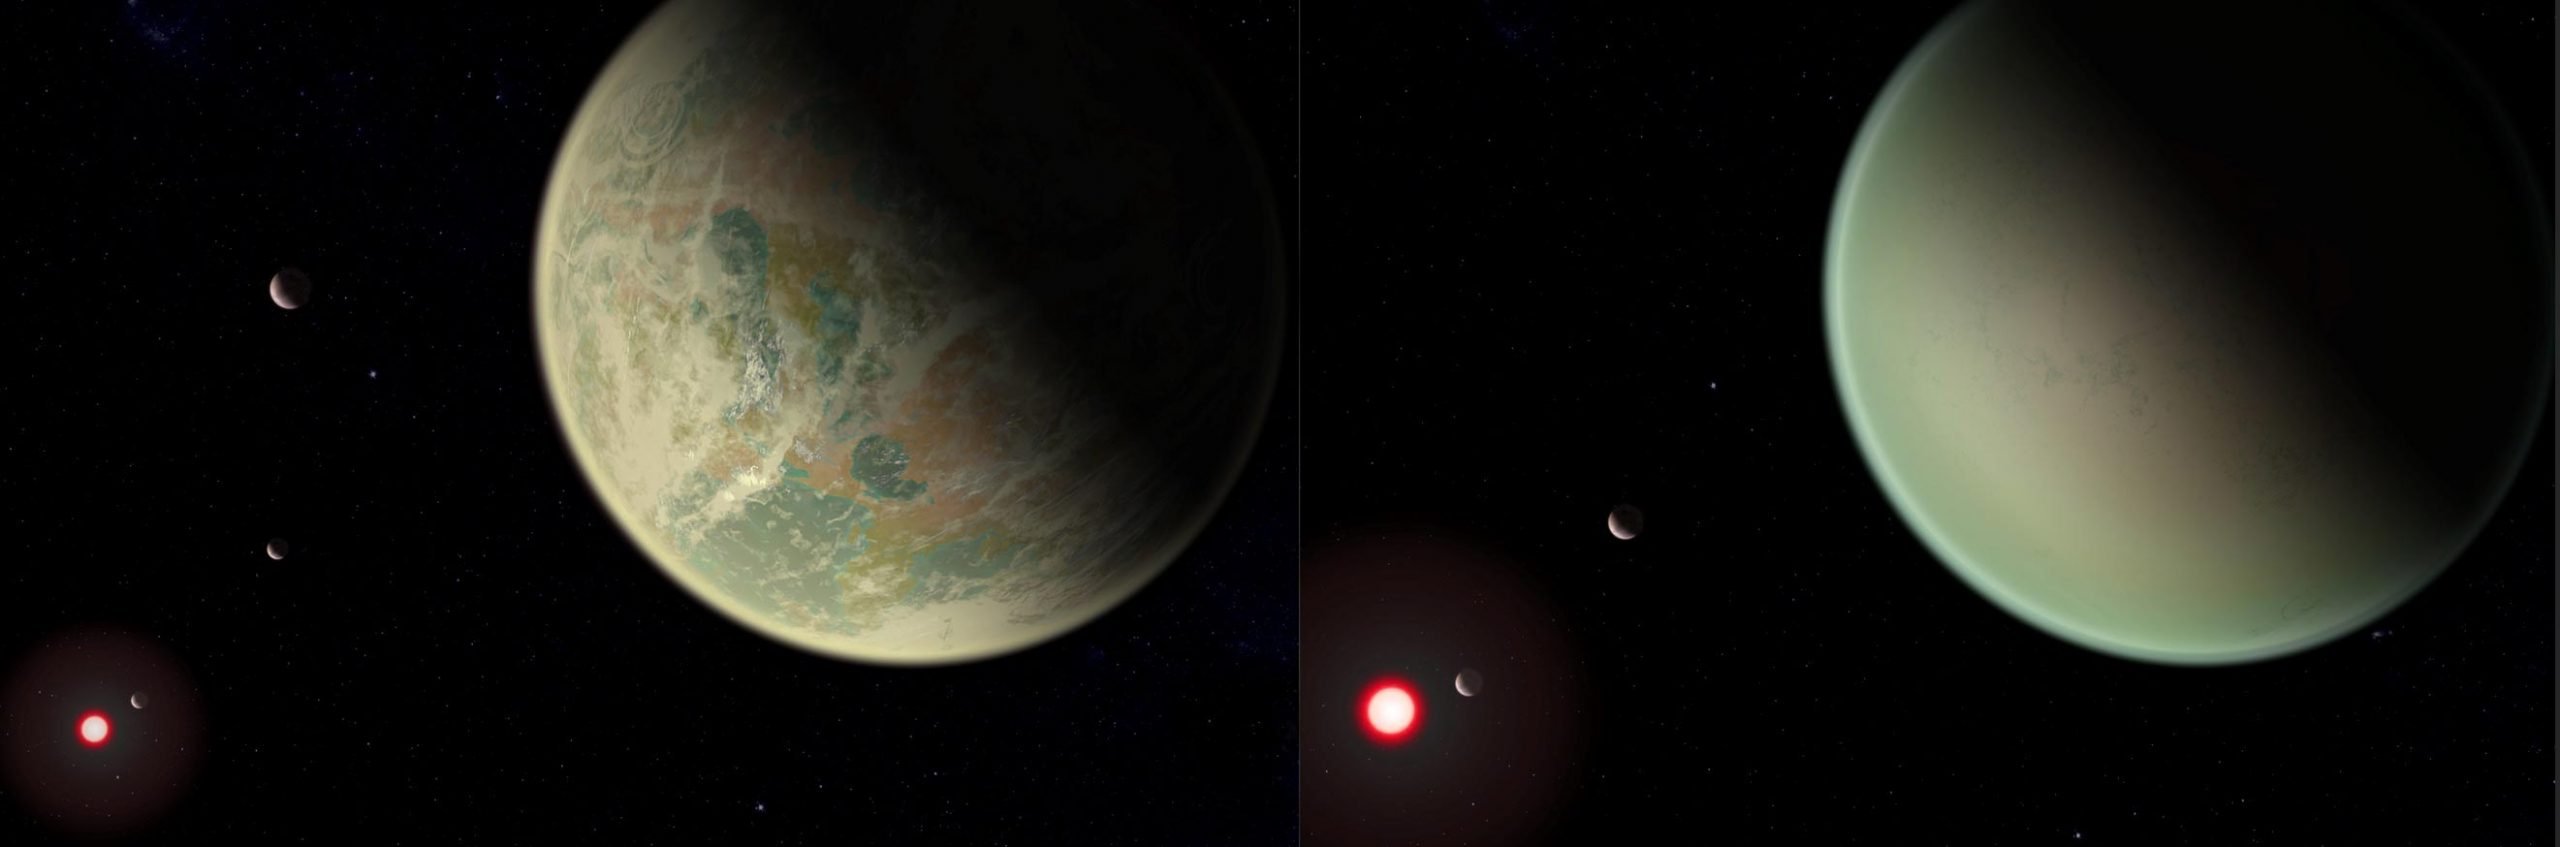 In Search for Alien Life, Scientists Develop New Method to Detect Oxygen on Exoplanets image